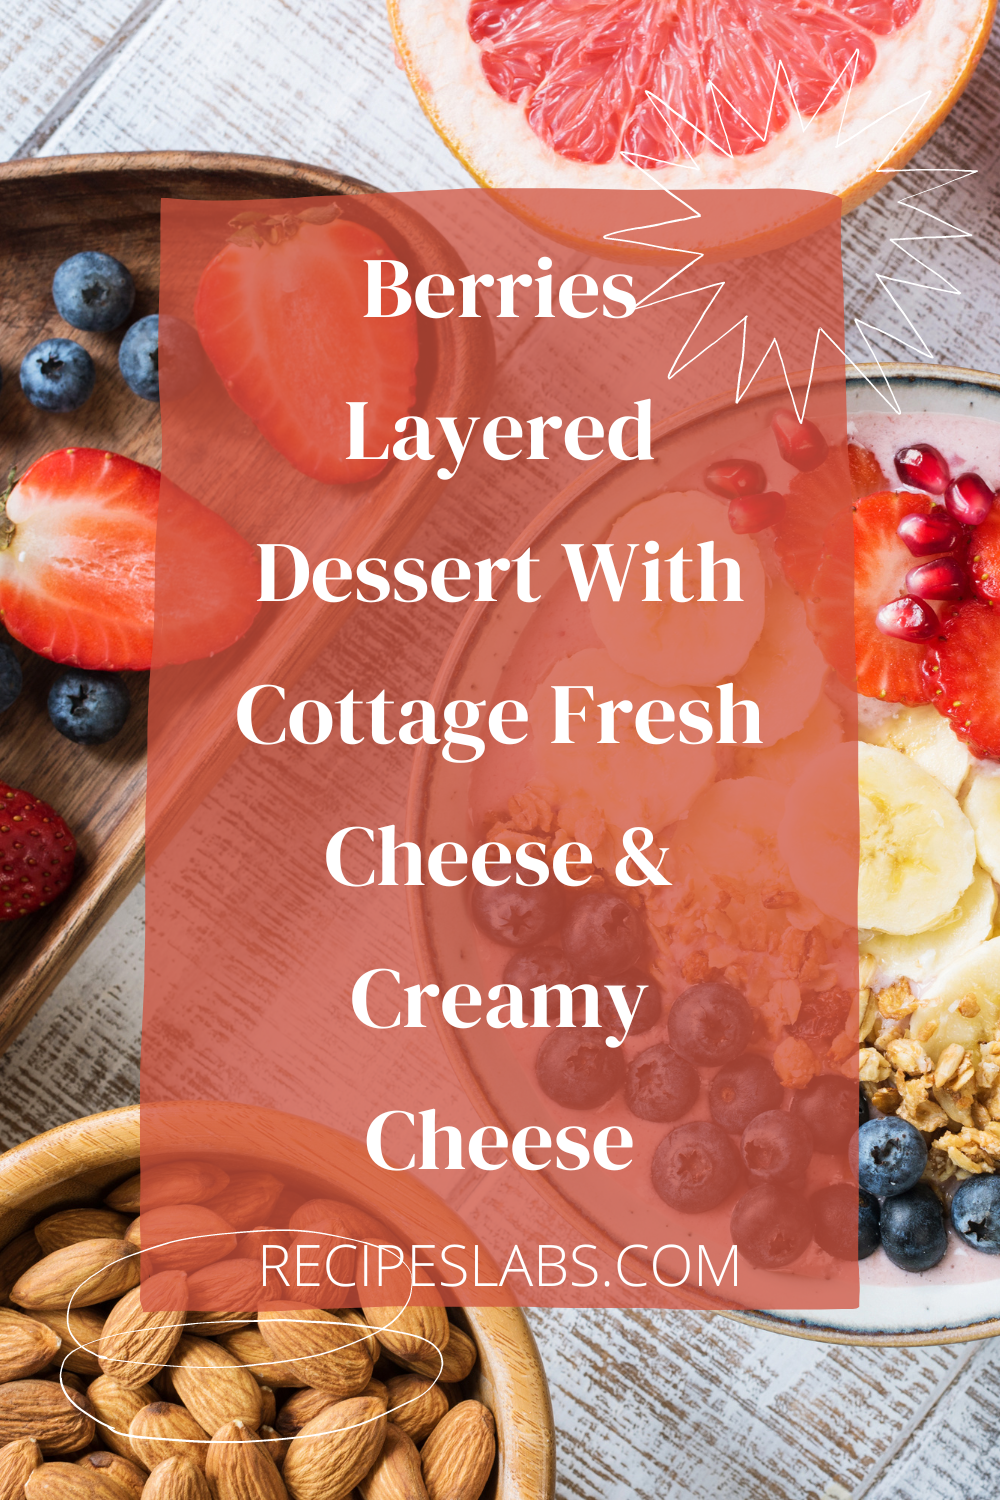 Berries Layered Dessert With Cottage Fresh Cheese & Creamy Cheese